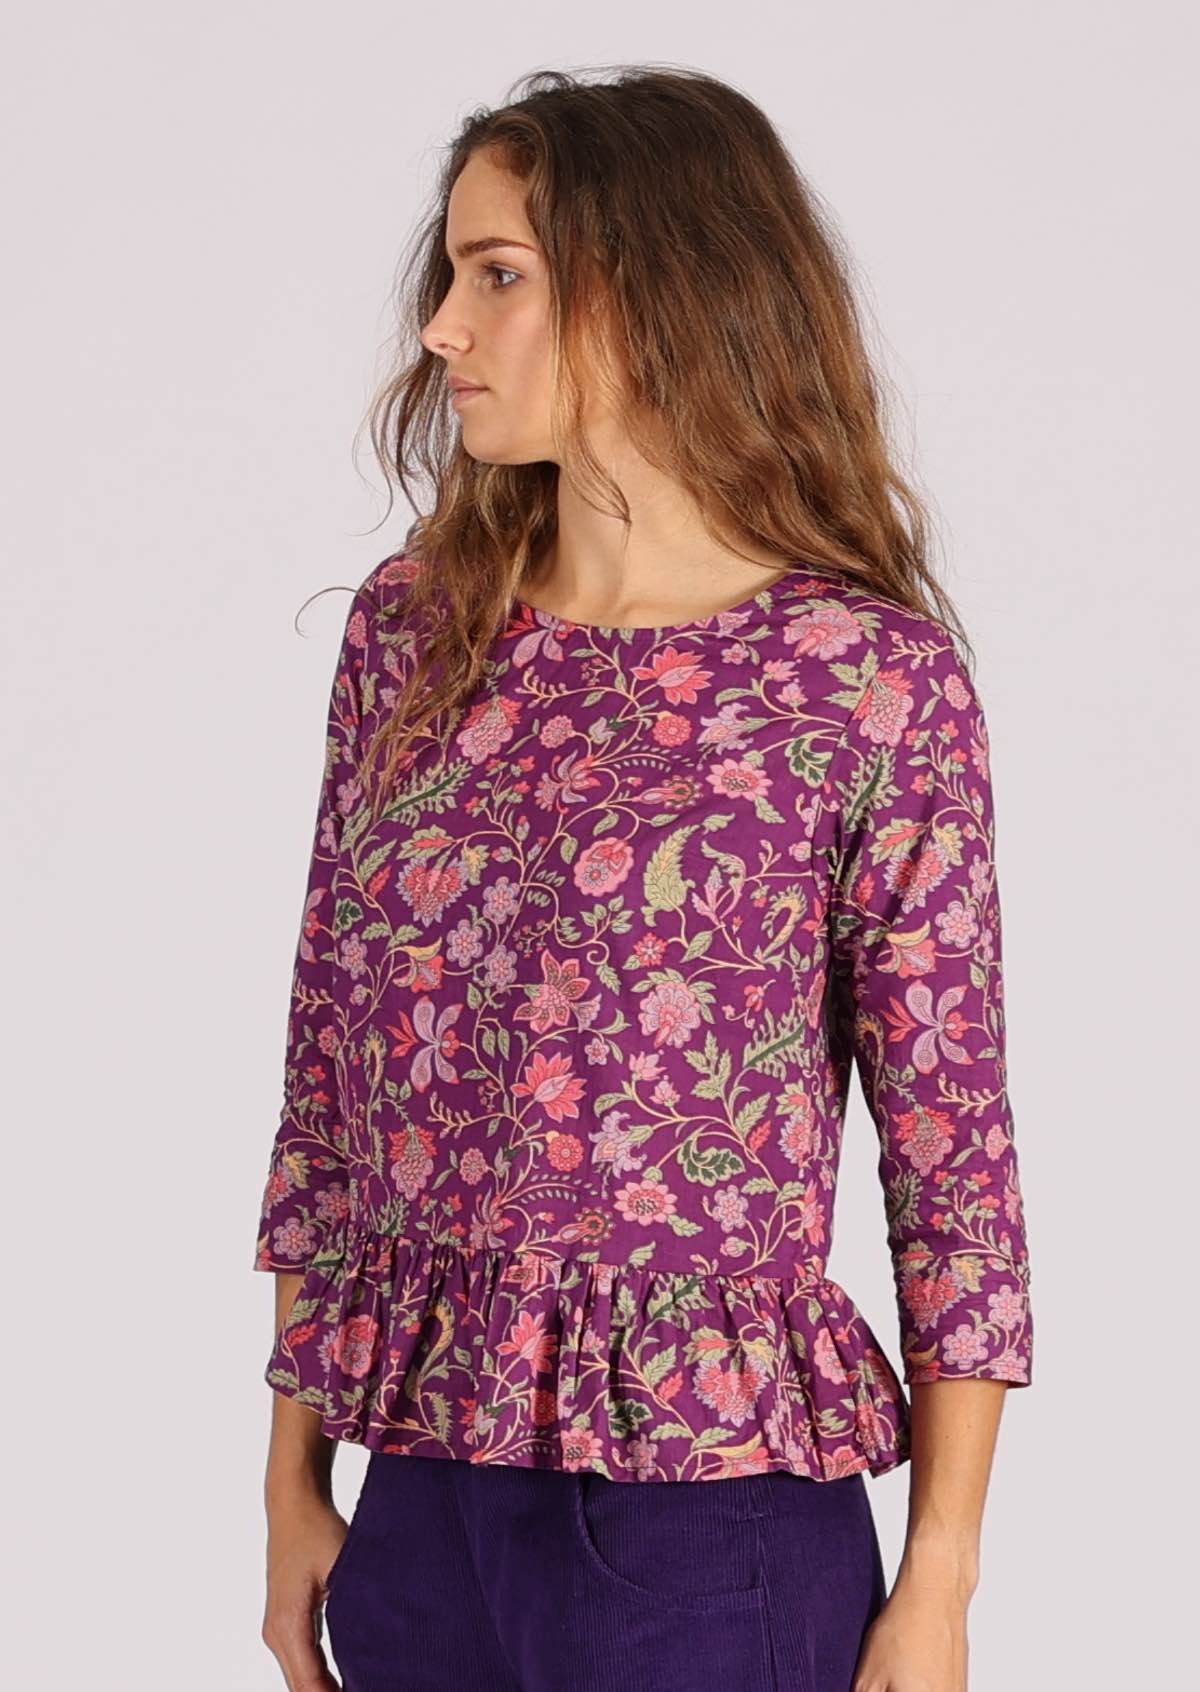 Floral print with purple base cotton top with peplum frill